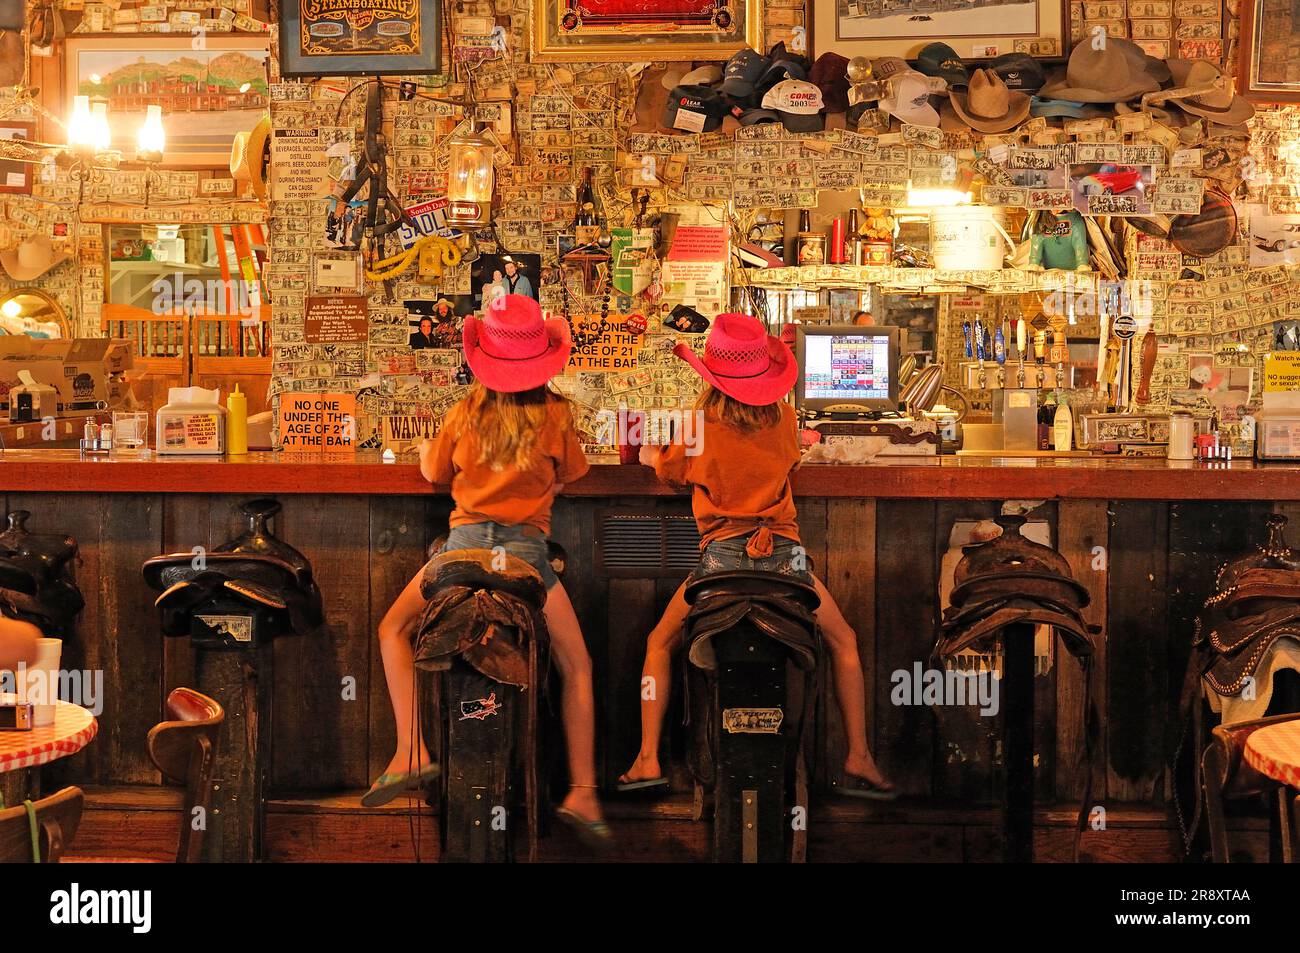 Two girls sitting in saddles at Superstition Saloon Mercantile, Apache Trail, Tortilla Flats, Arizona. Stock Photo